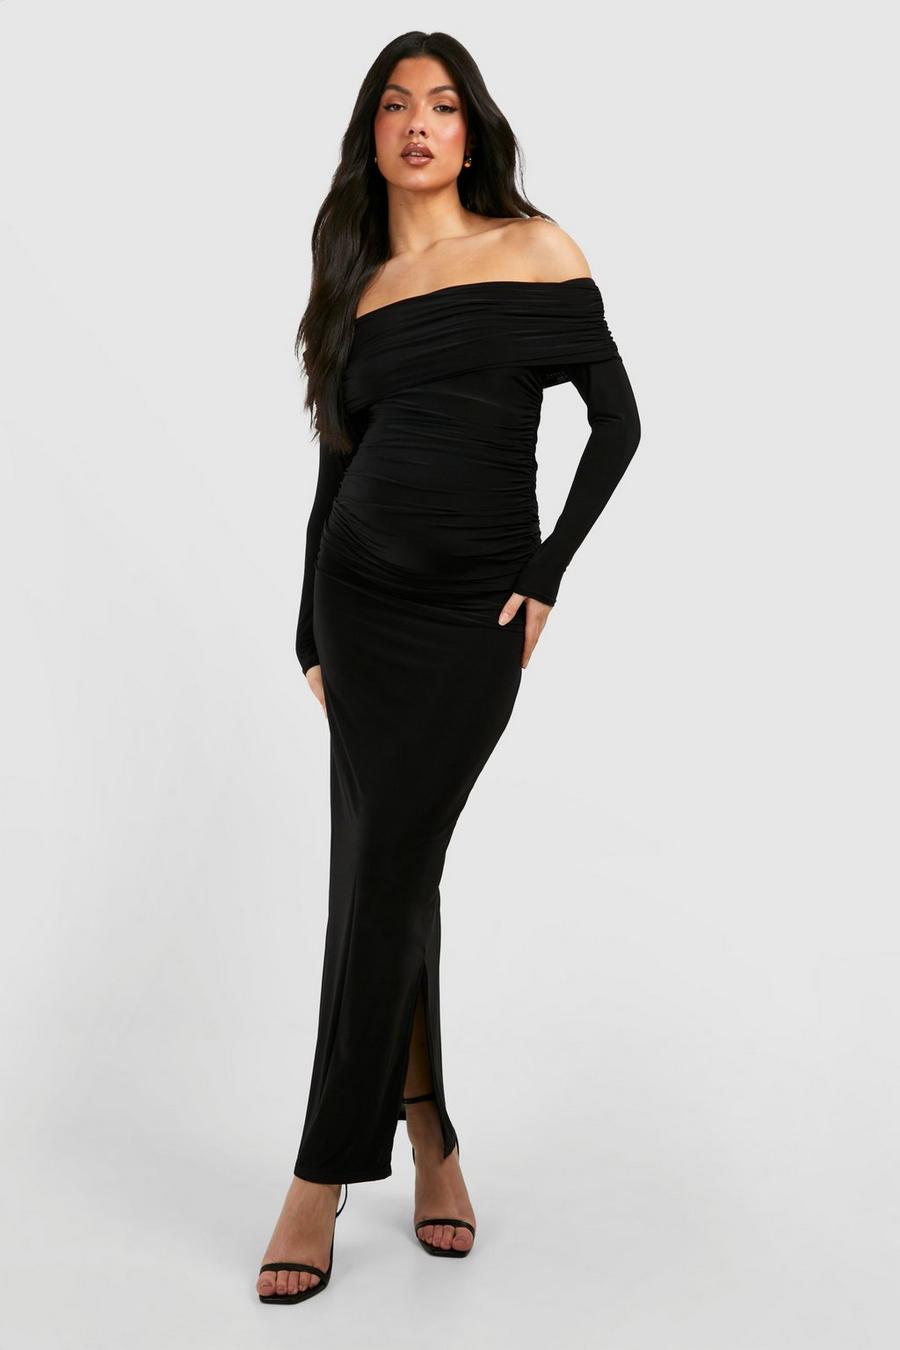 Black Maternity Slinky Ruched Top And Skirt Co-ord